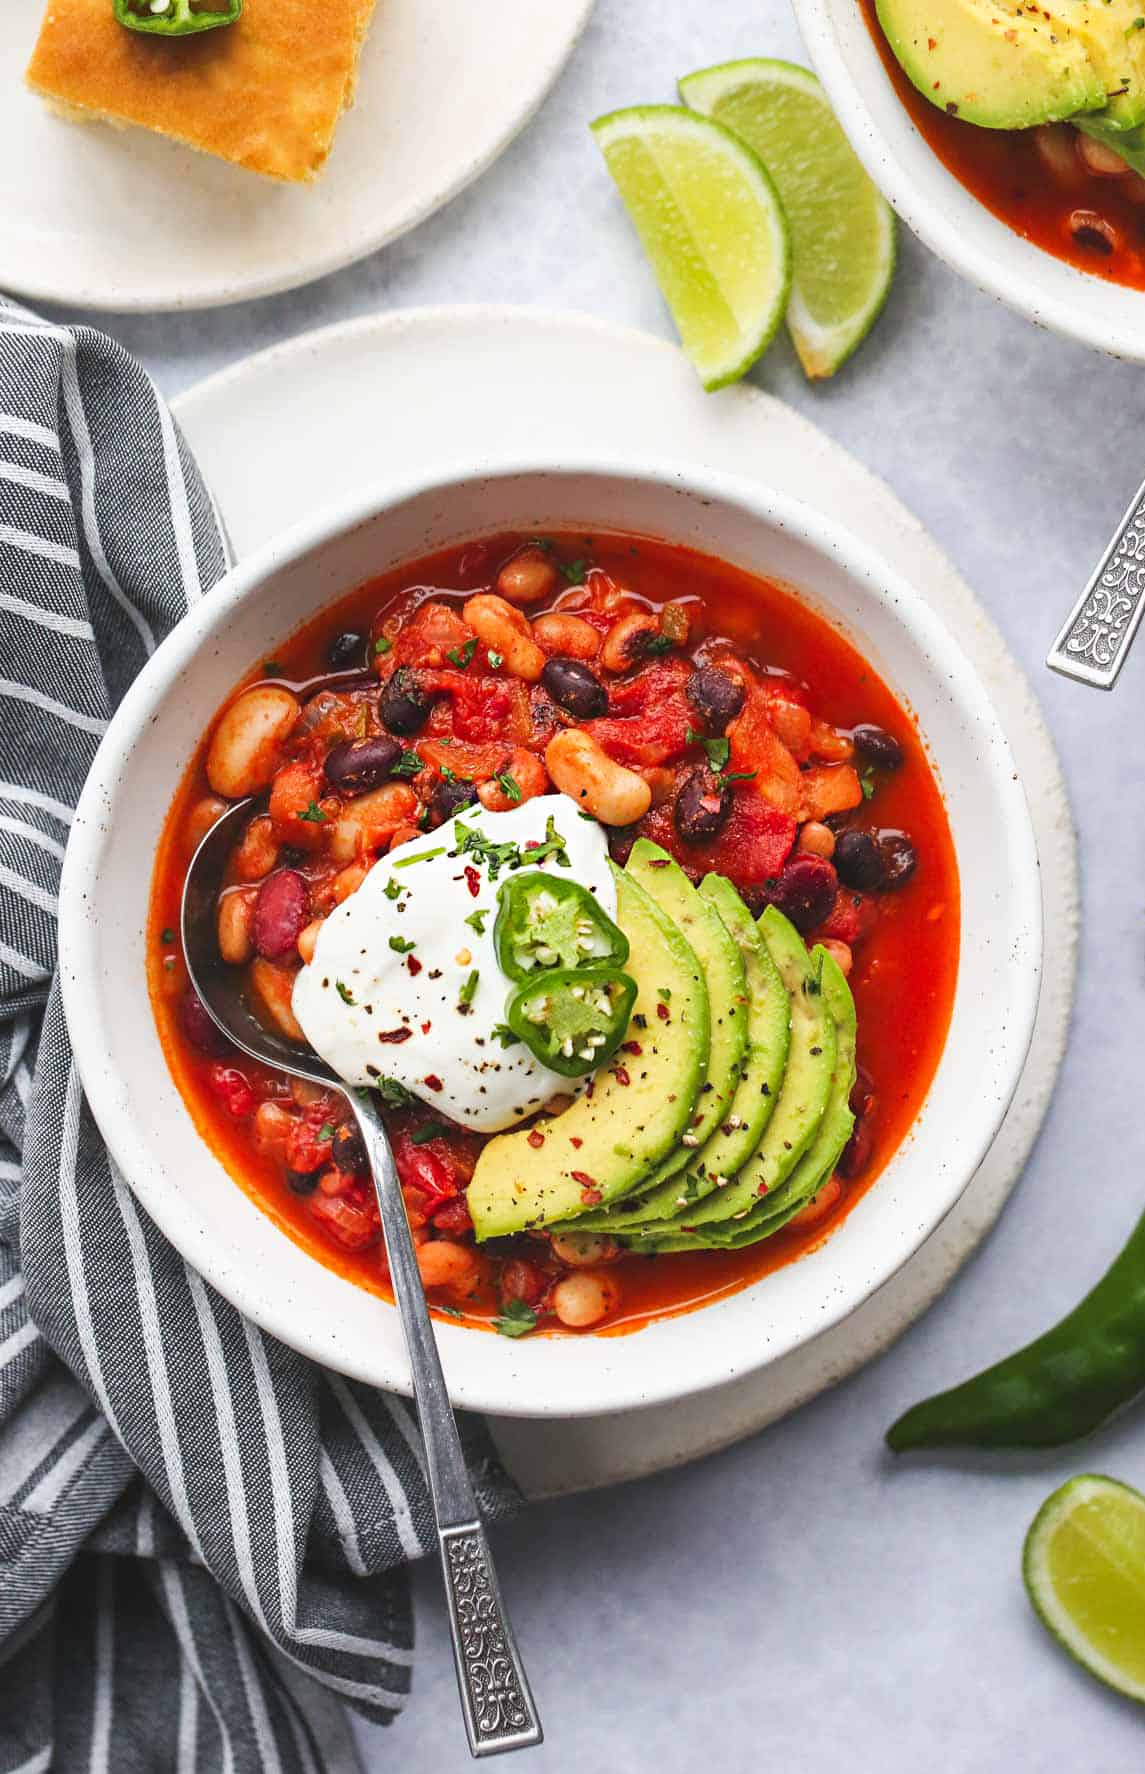 Vegan chili in a white bowl, topped with avocado, vegan sour cream, and jalapeño slices. Overhead shot.